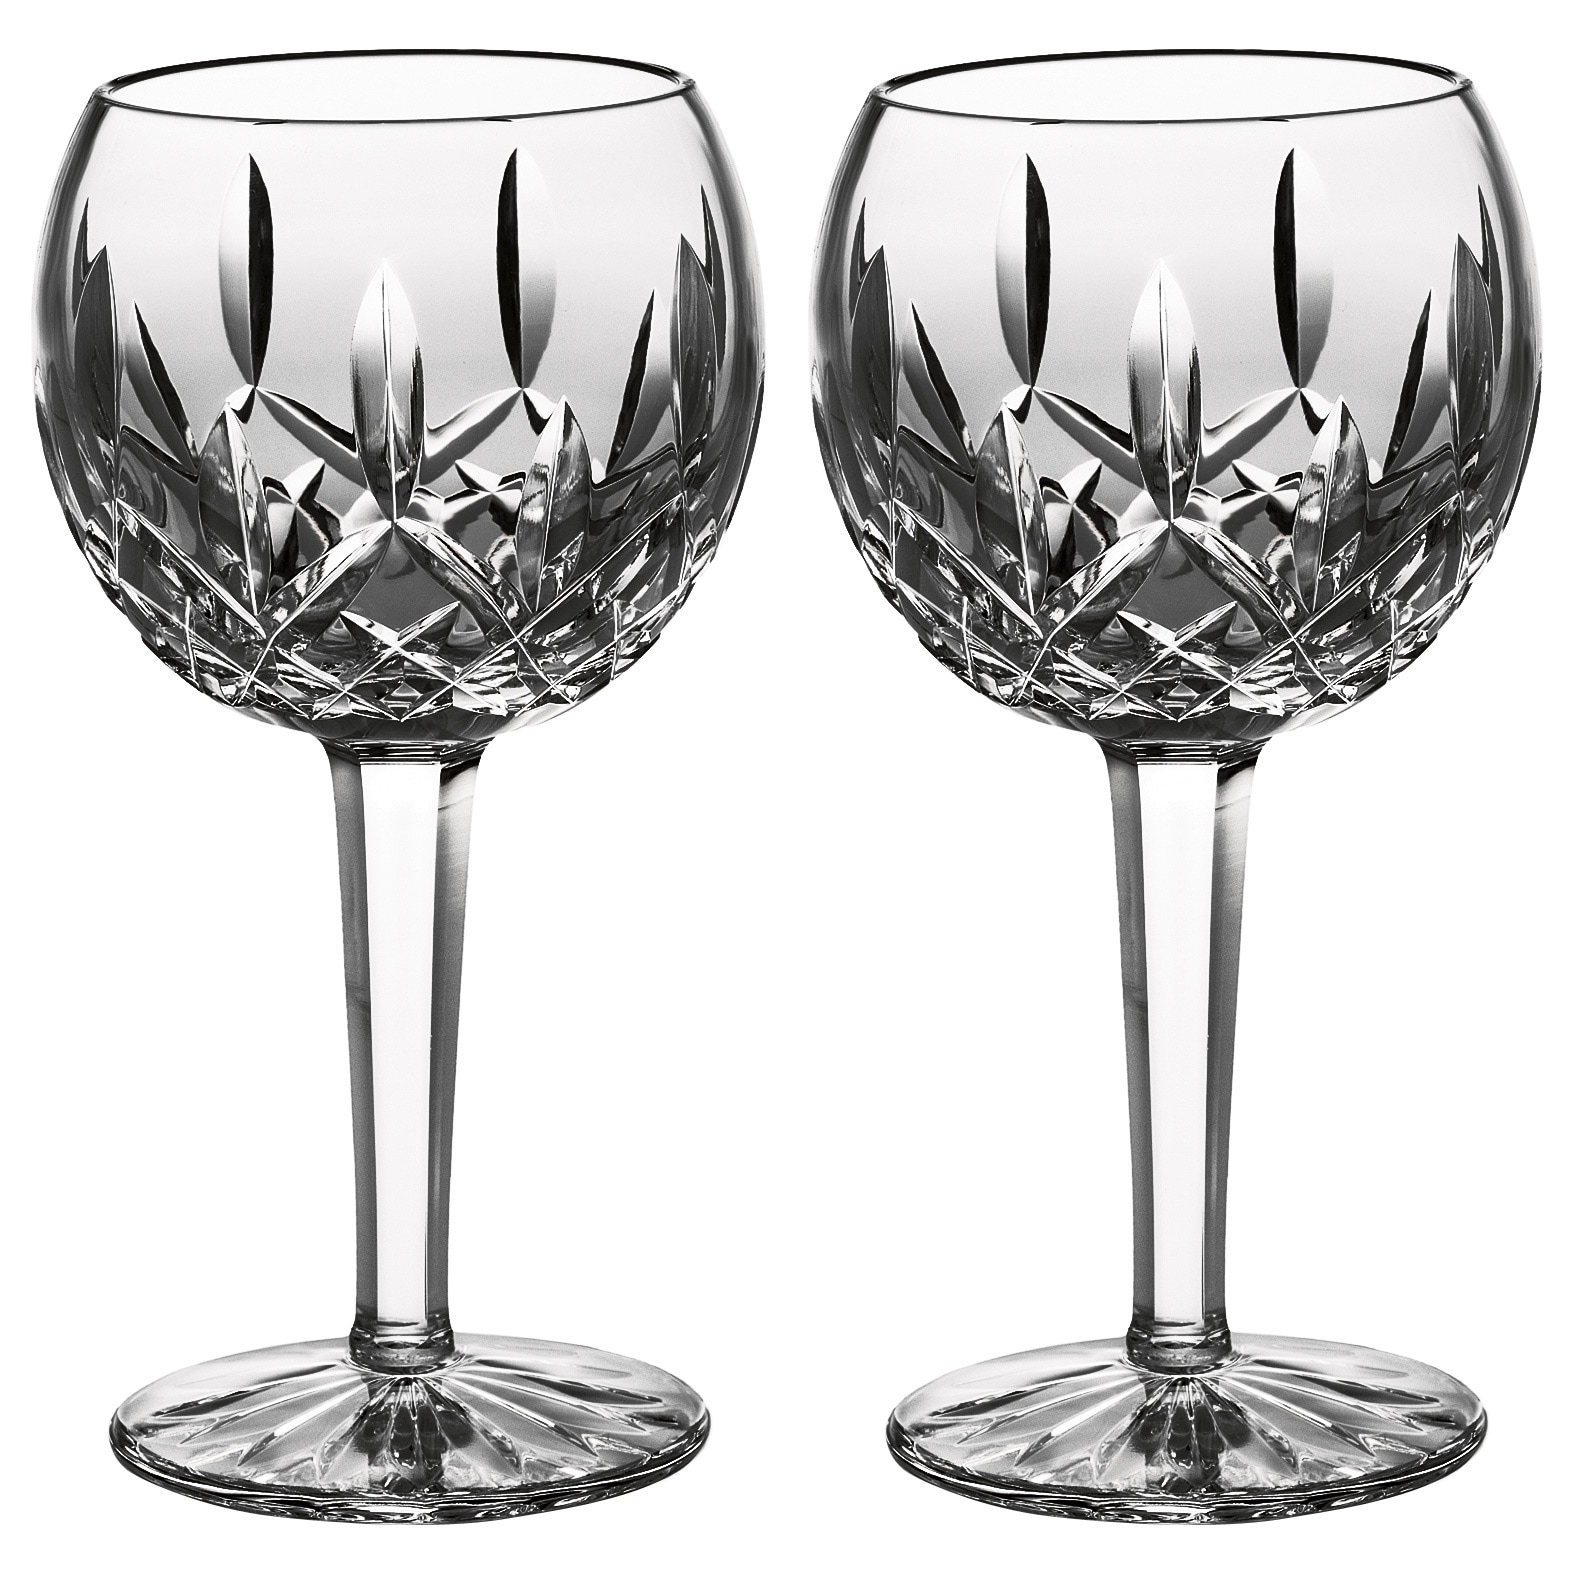 https://ak1.ostkcdn.com/images/products/8610173/Waterford-Classic-Lismore-Balloon-Wine-Glasses-Set-of-2-aa9bdcfb-f7fd-48c8-9621-70e86dc3d4a5.jpg